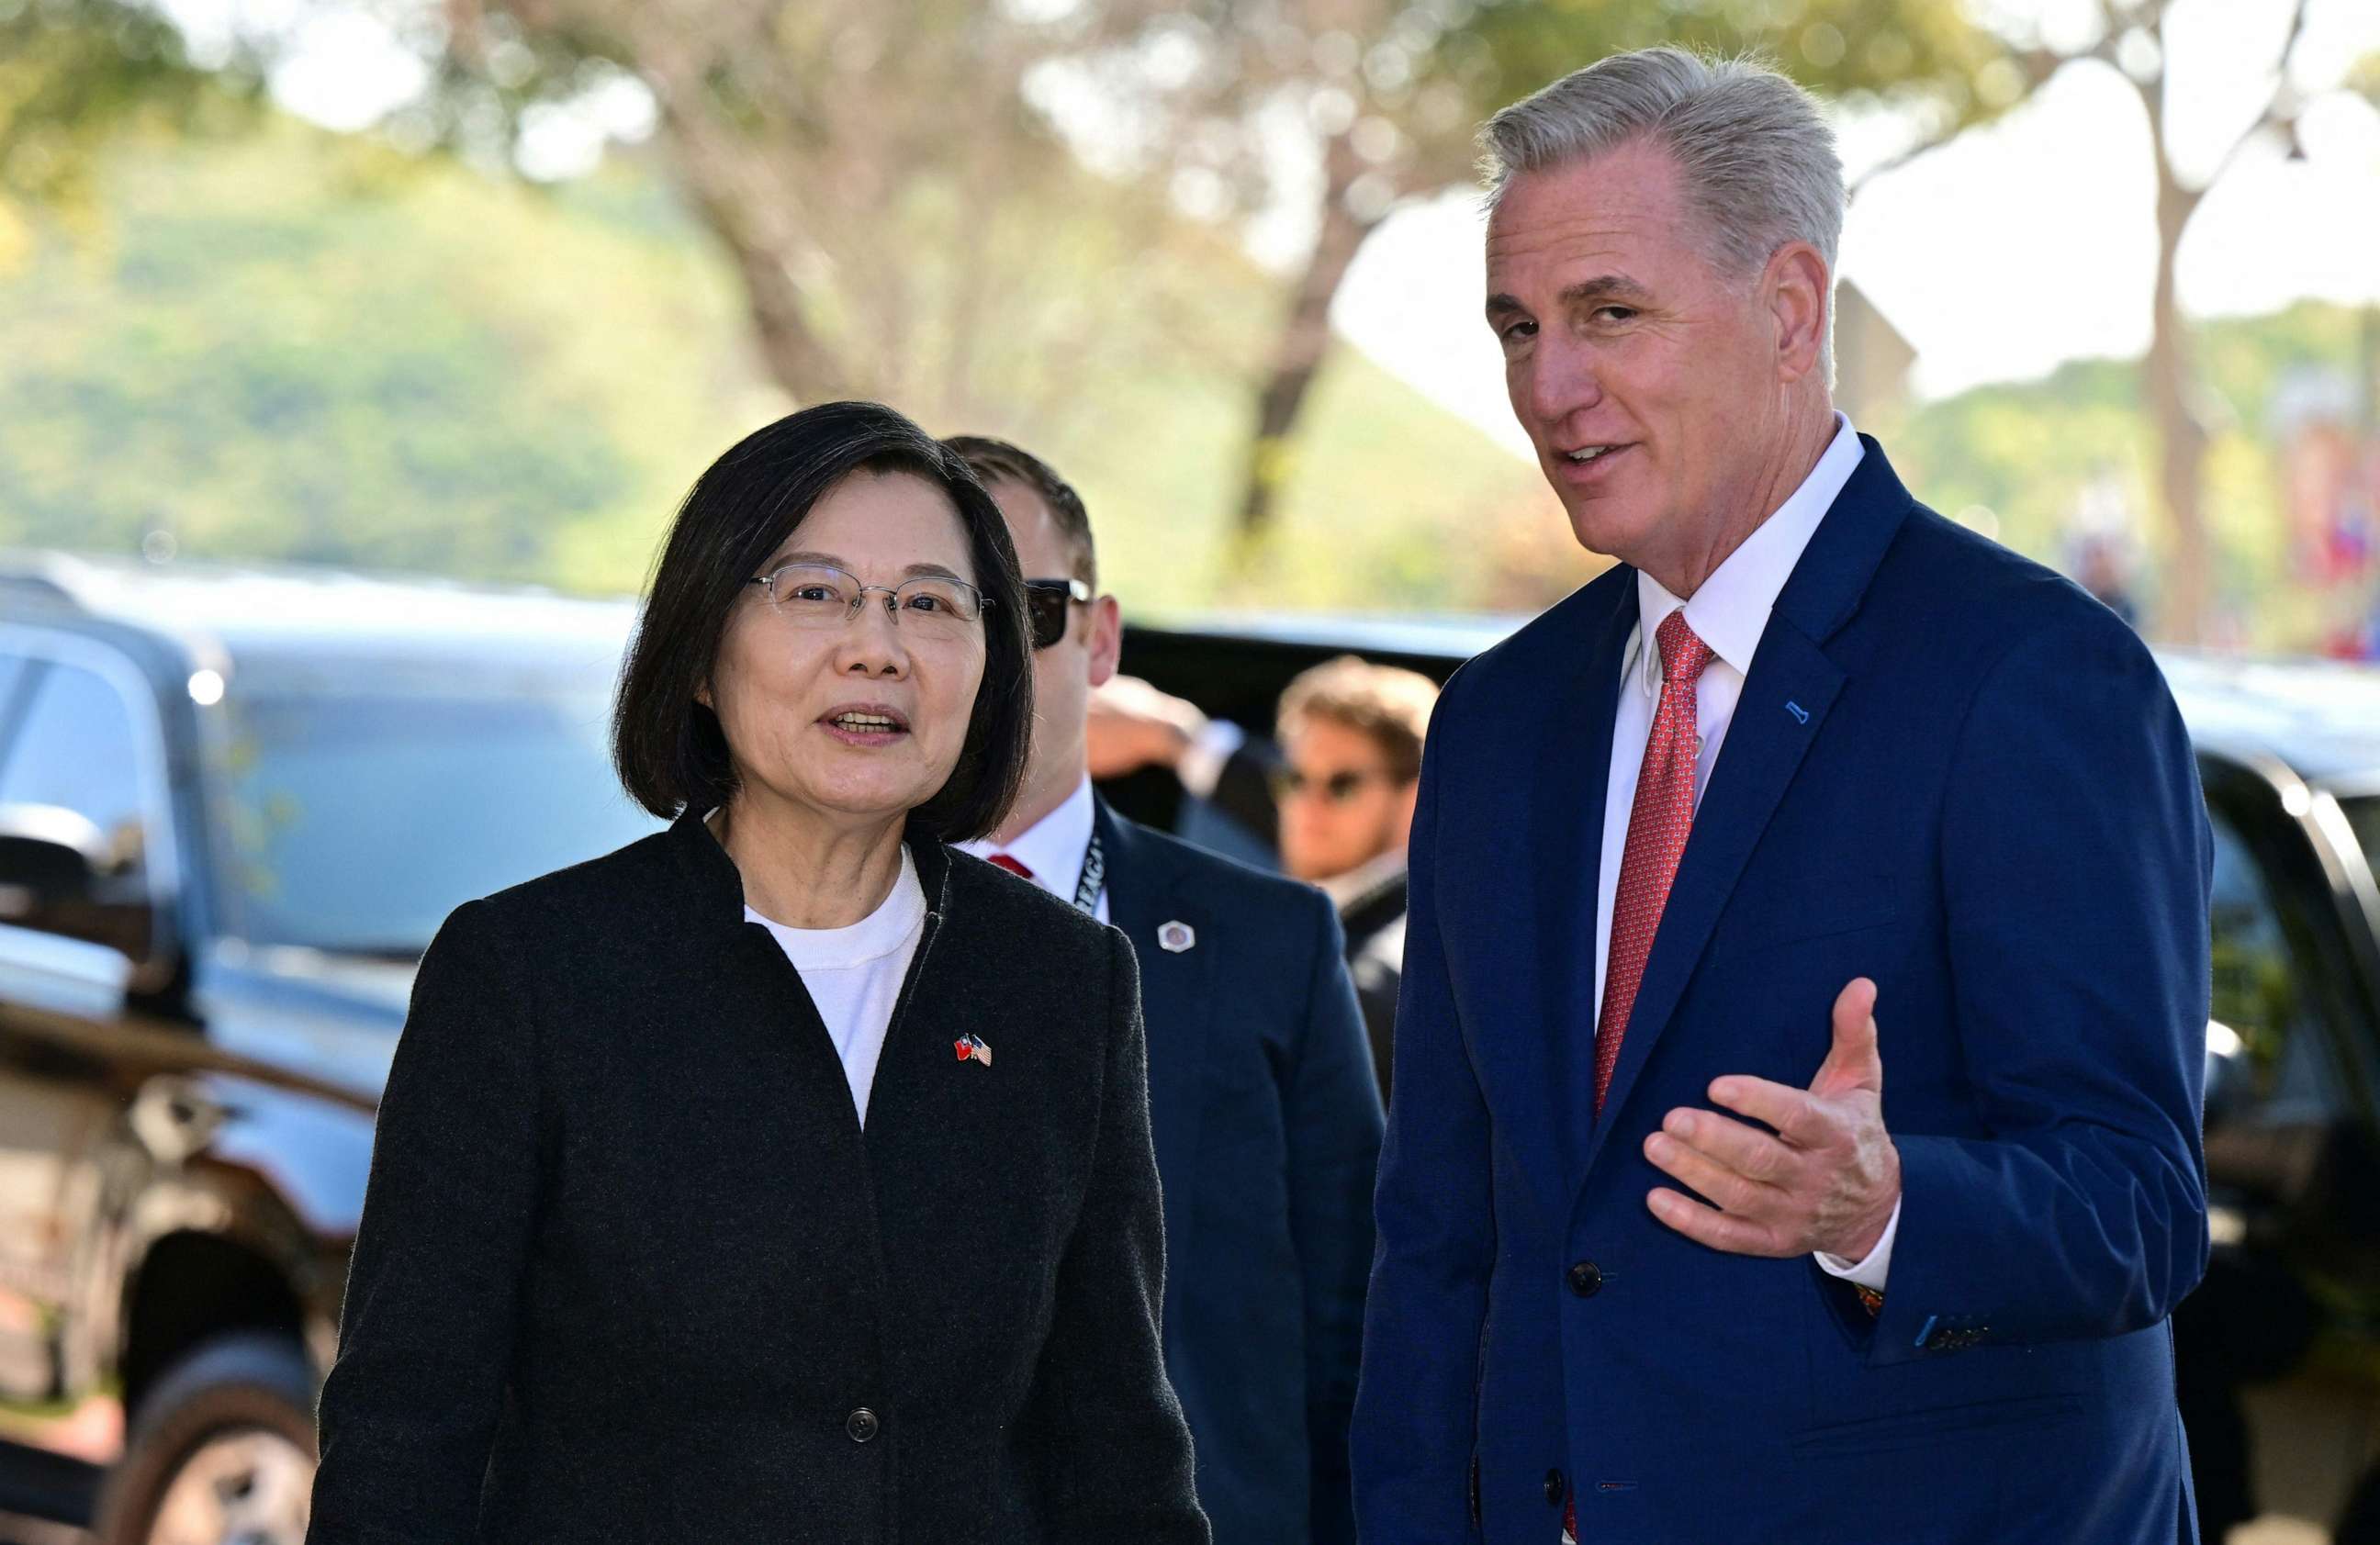 PHOTO: TOPSHOT - US Speaker of the House Kevin McCarthy (R-CA) (R) speaks with Taiwan President Tsai Ing-wen while arriving for a bipartisan meeting at the Ronald Reagan Presidential Library in Simi Valley, California, on April 5, 2023.